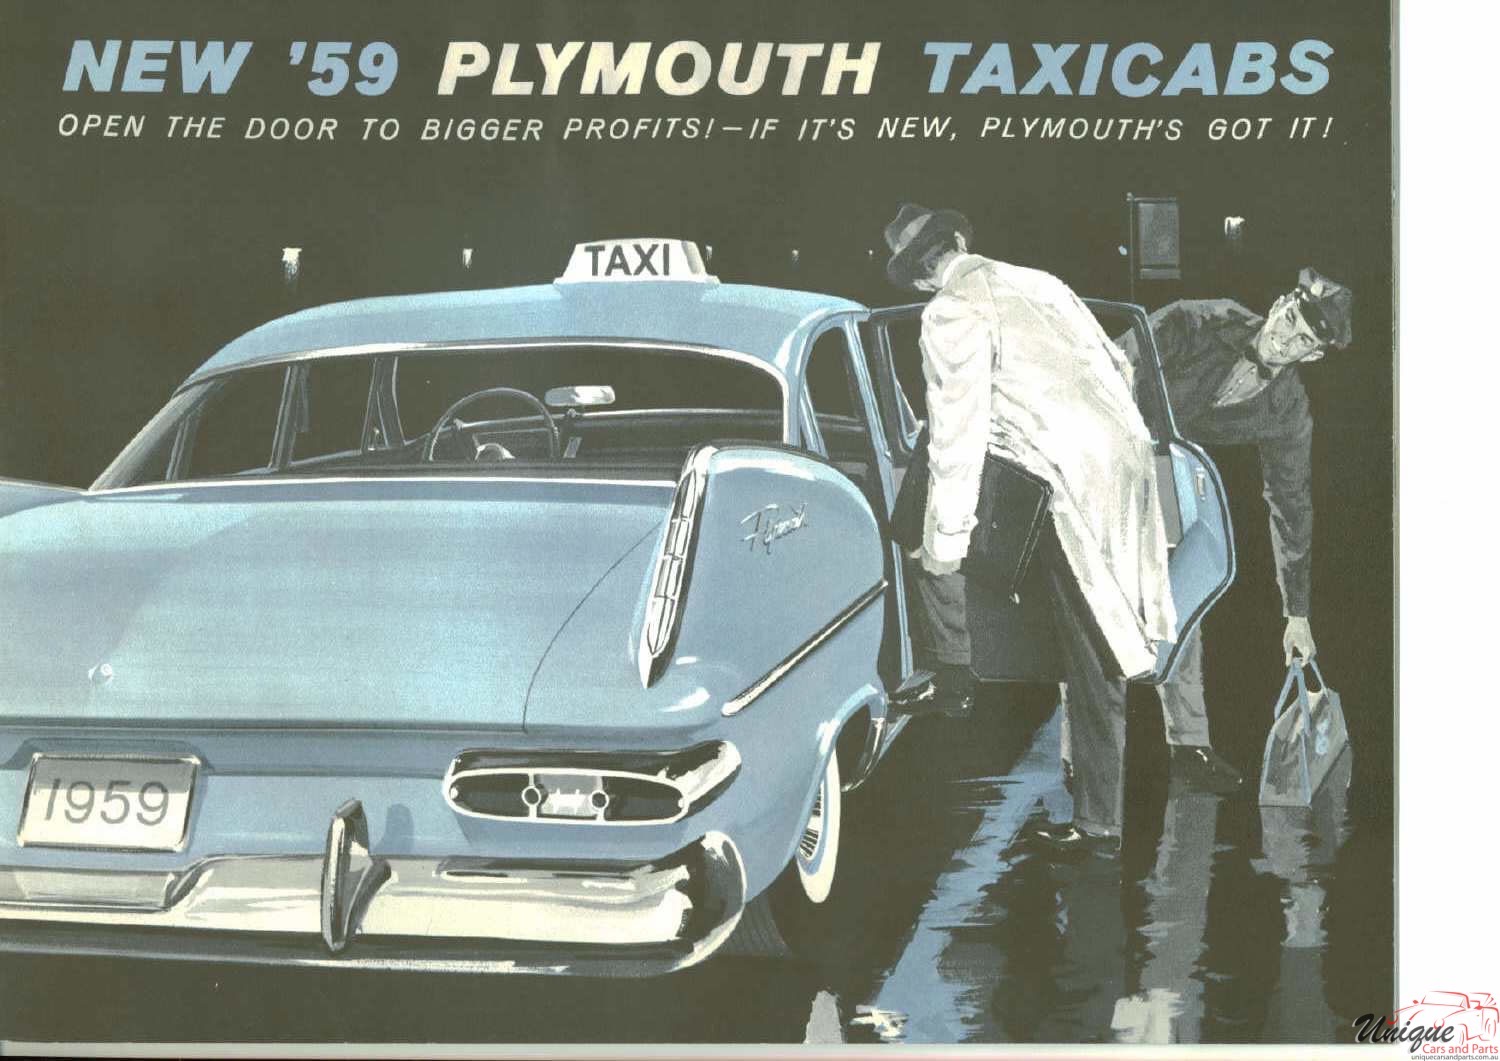 1959 Plymouth Taxi Brochure